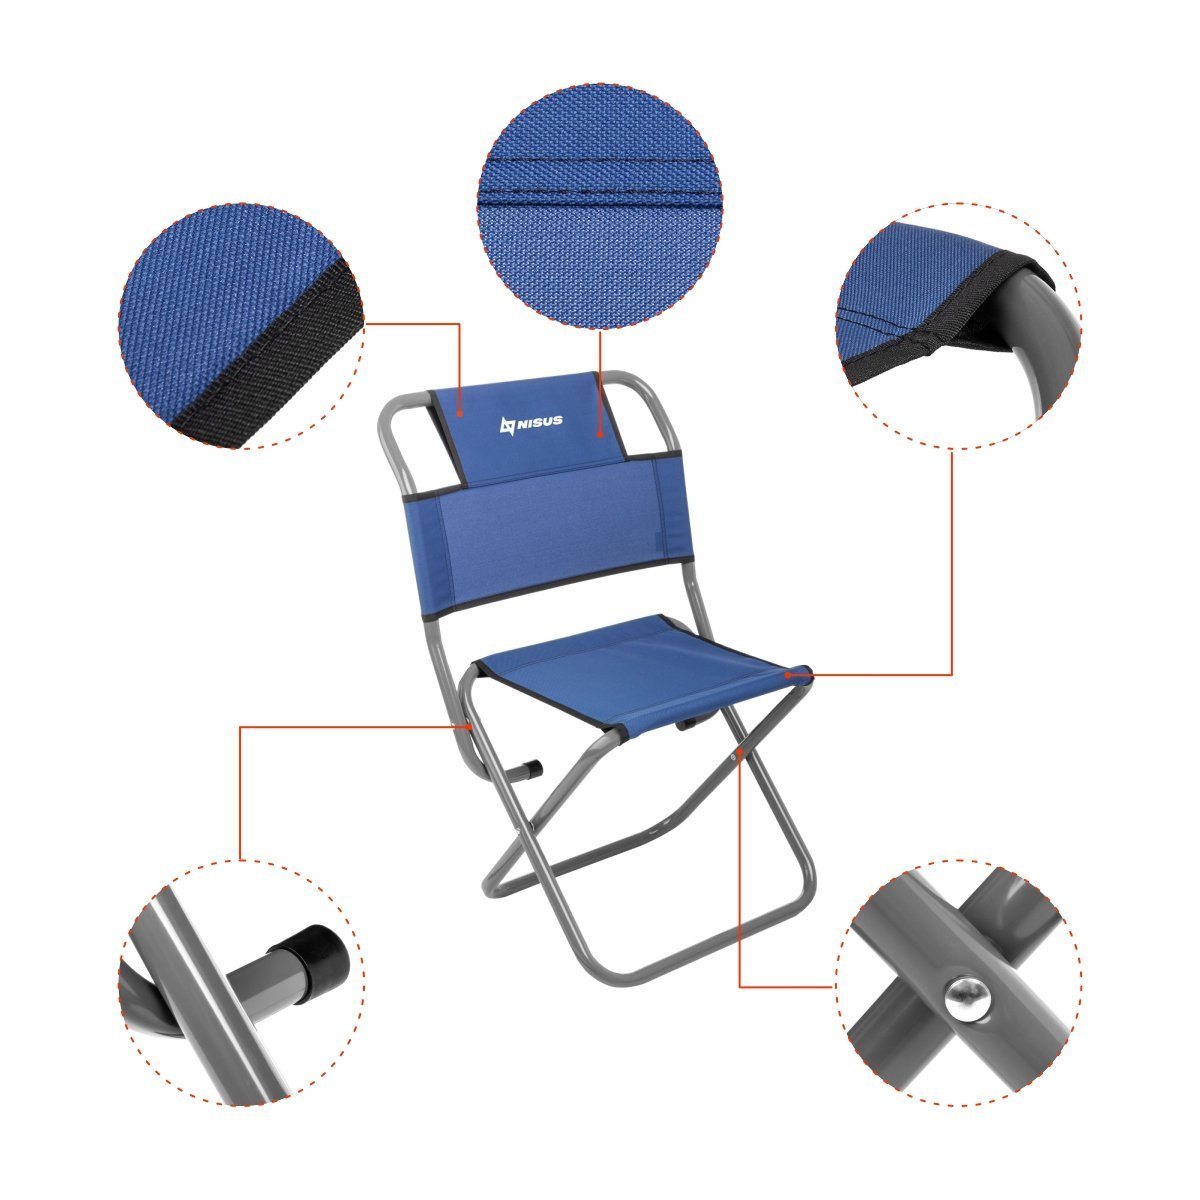 Blue camping chair Oxford fabric and steel pole